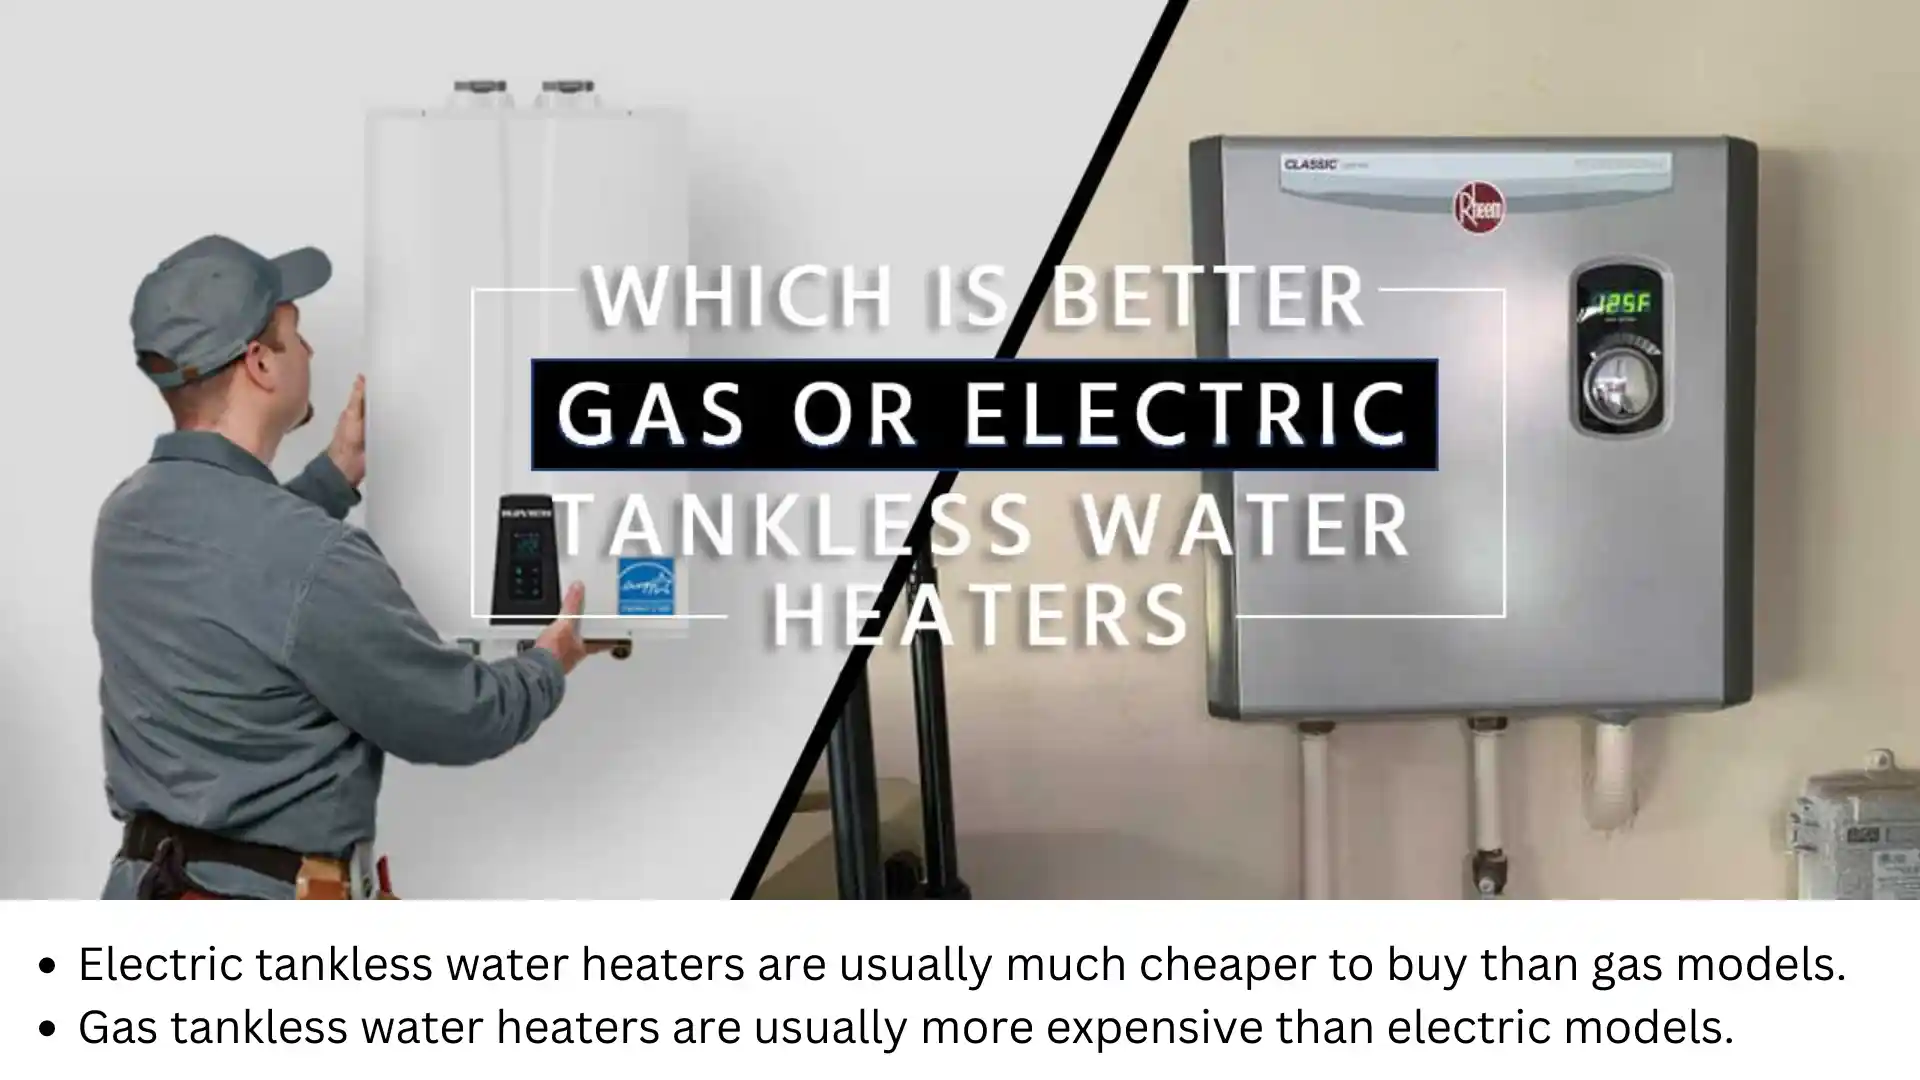 What Is The Difference Between An Electric And Gas Tankless Water Heater?